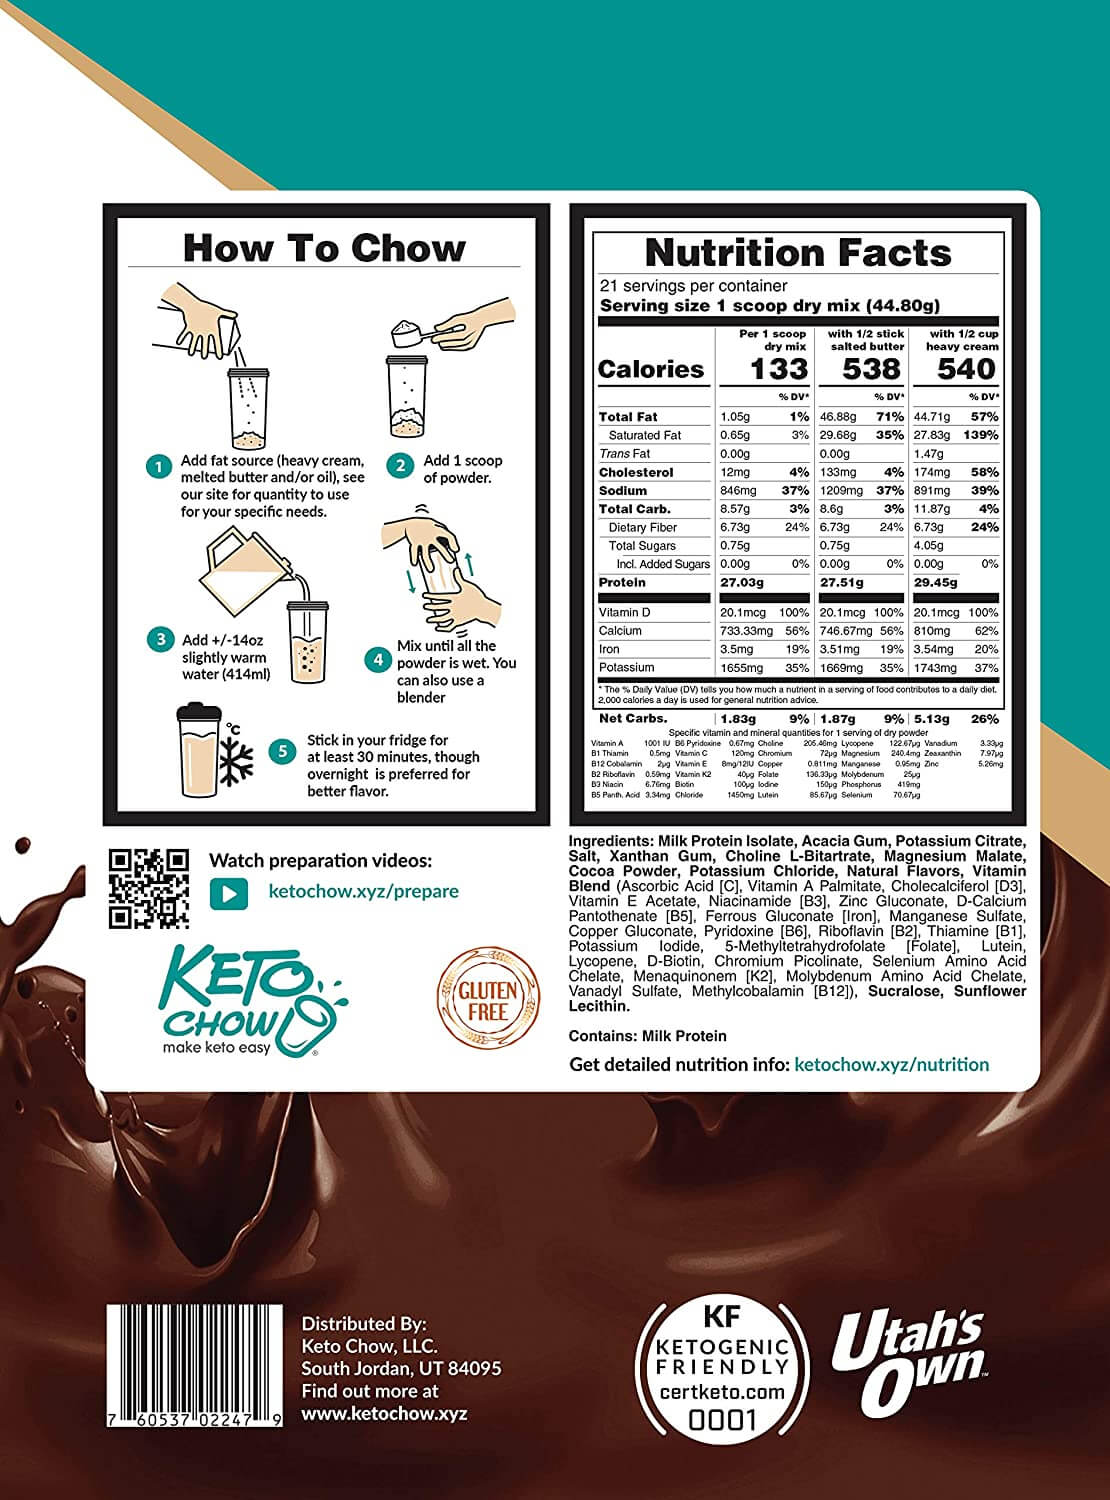 Keto Chow High Protein Meal Replacement Powder nutritional facts